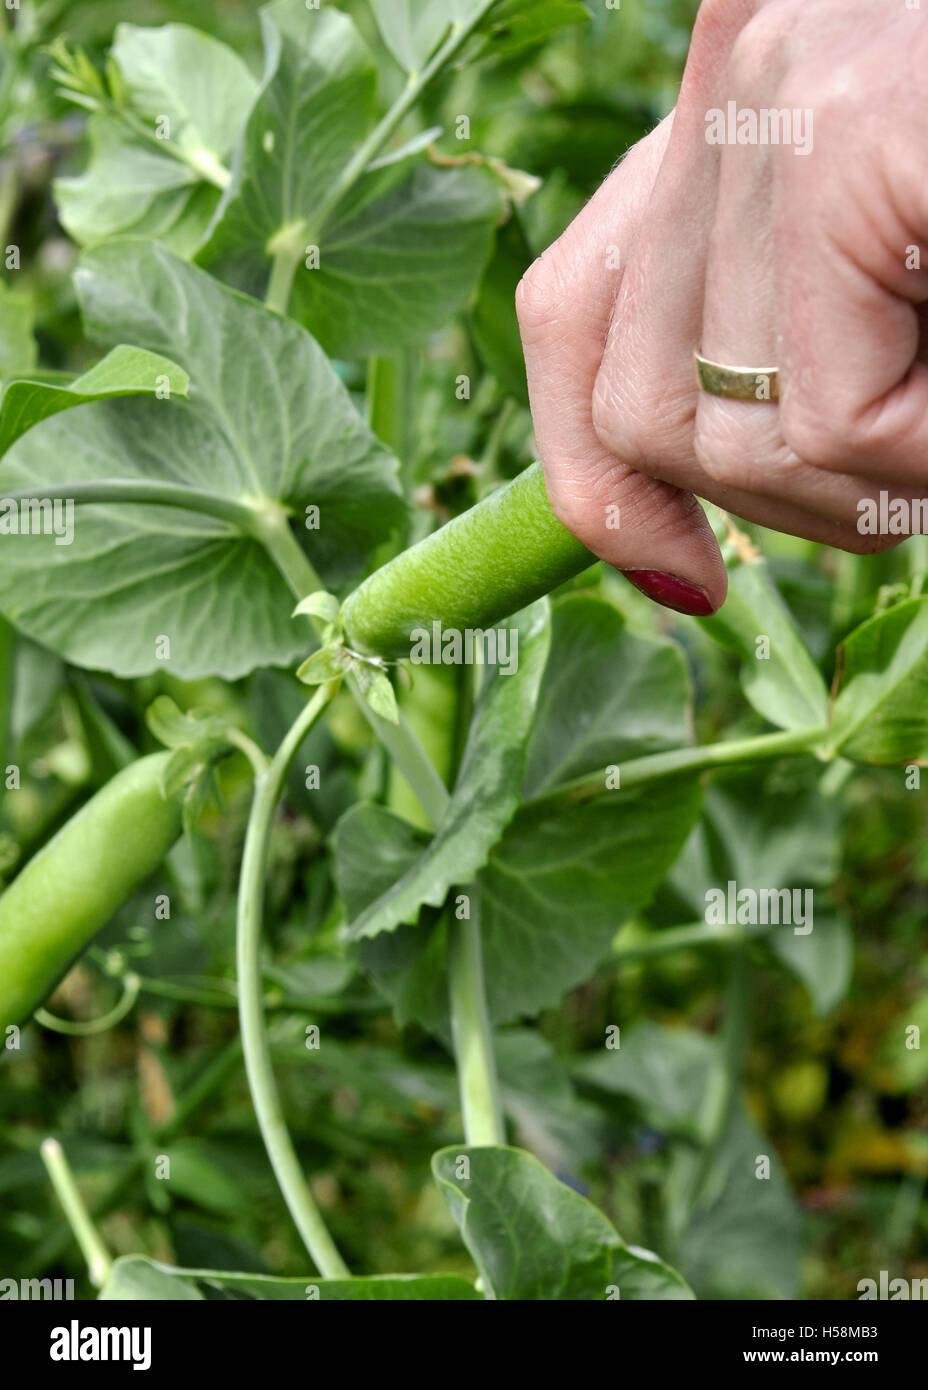 Womans hand picking home grown garden peas in pods Stock Photo